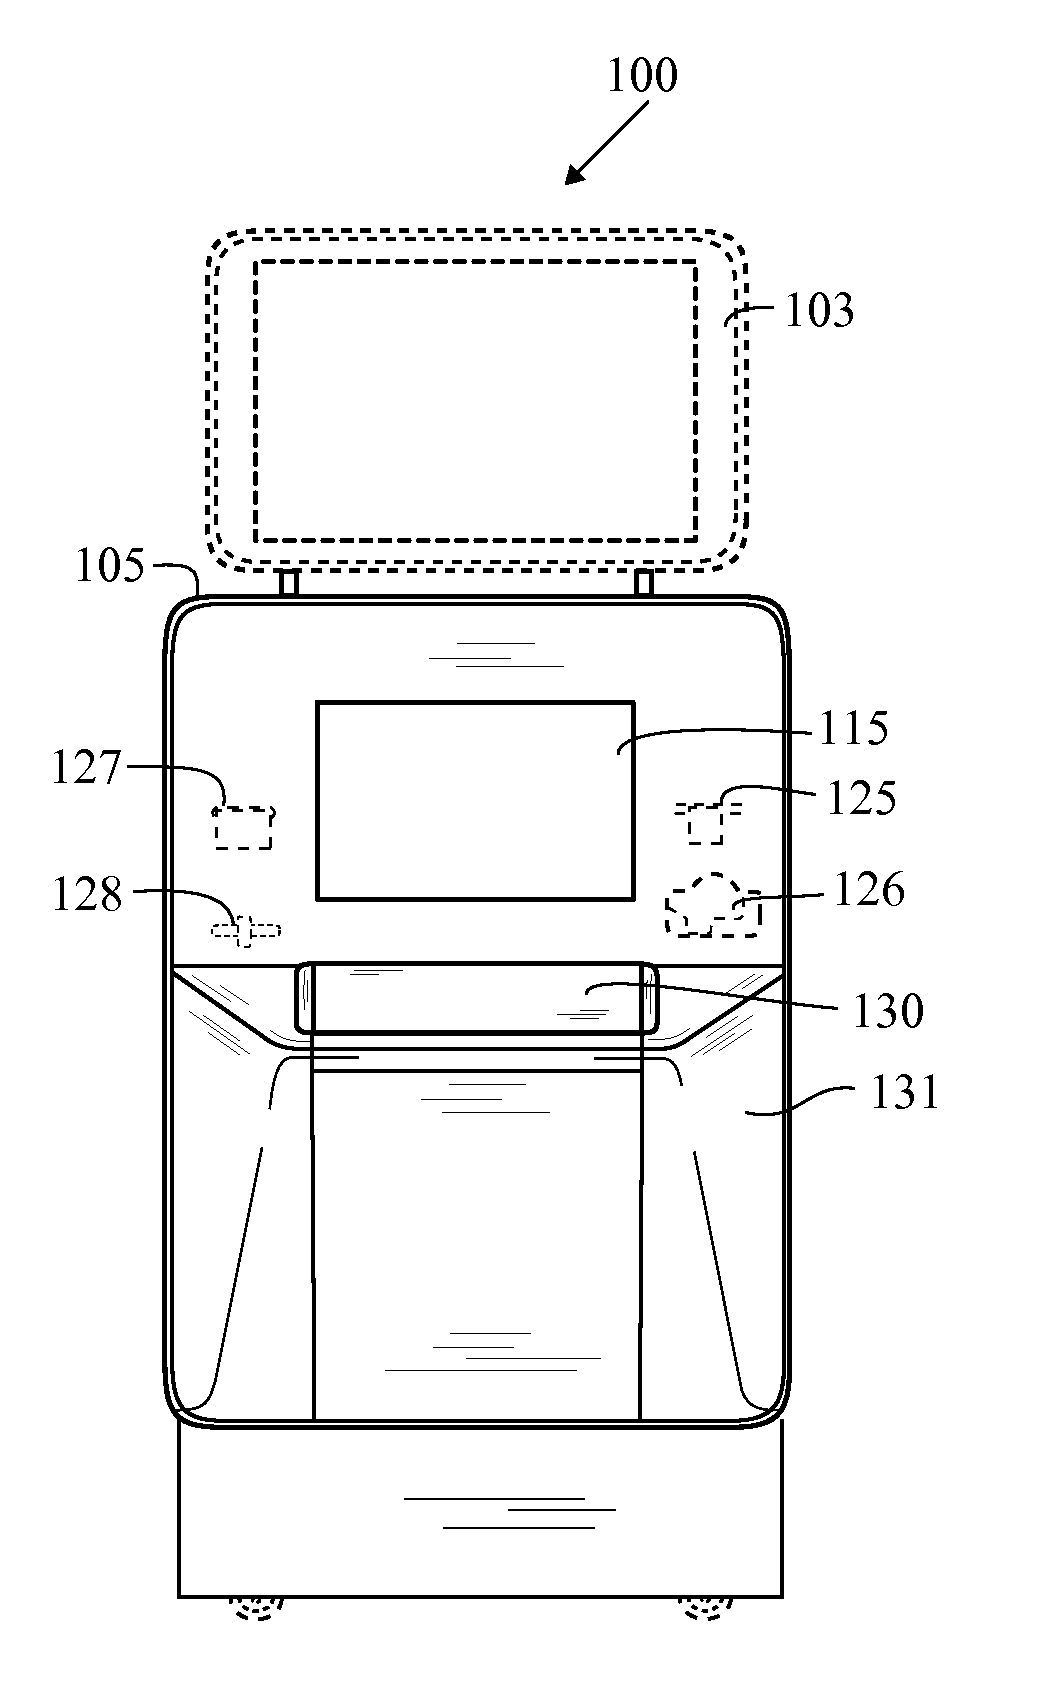 Method And Apparatus For Recycling Electronic Devices